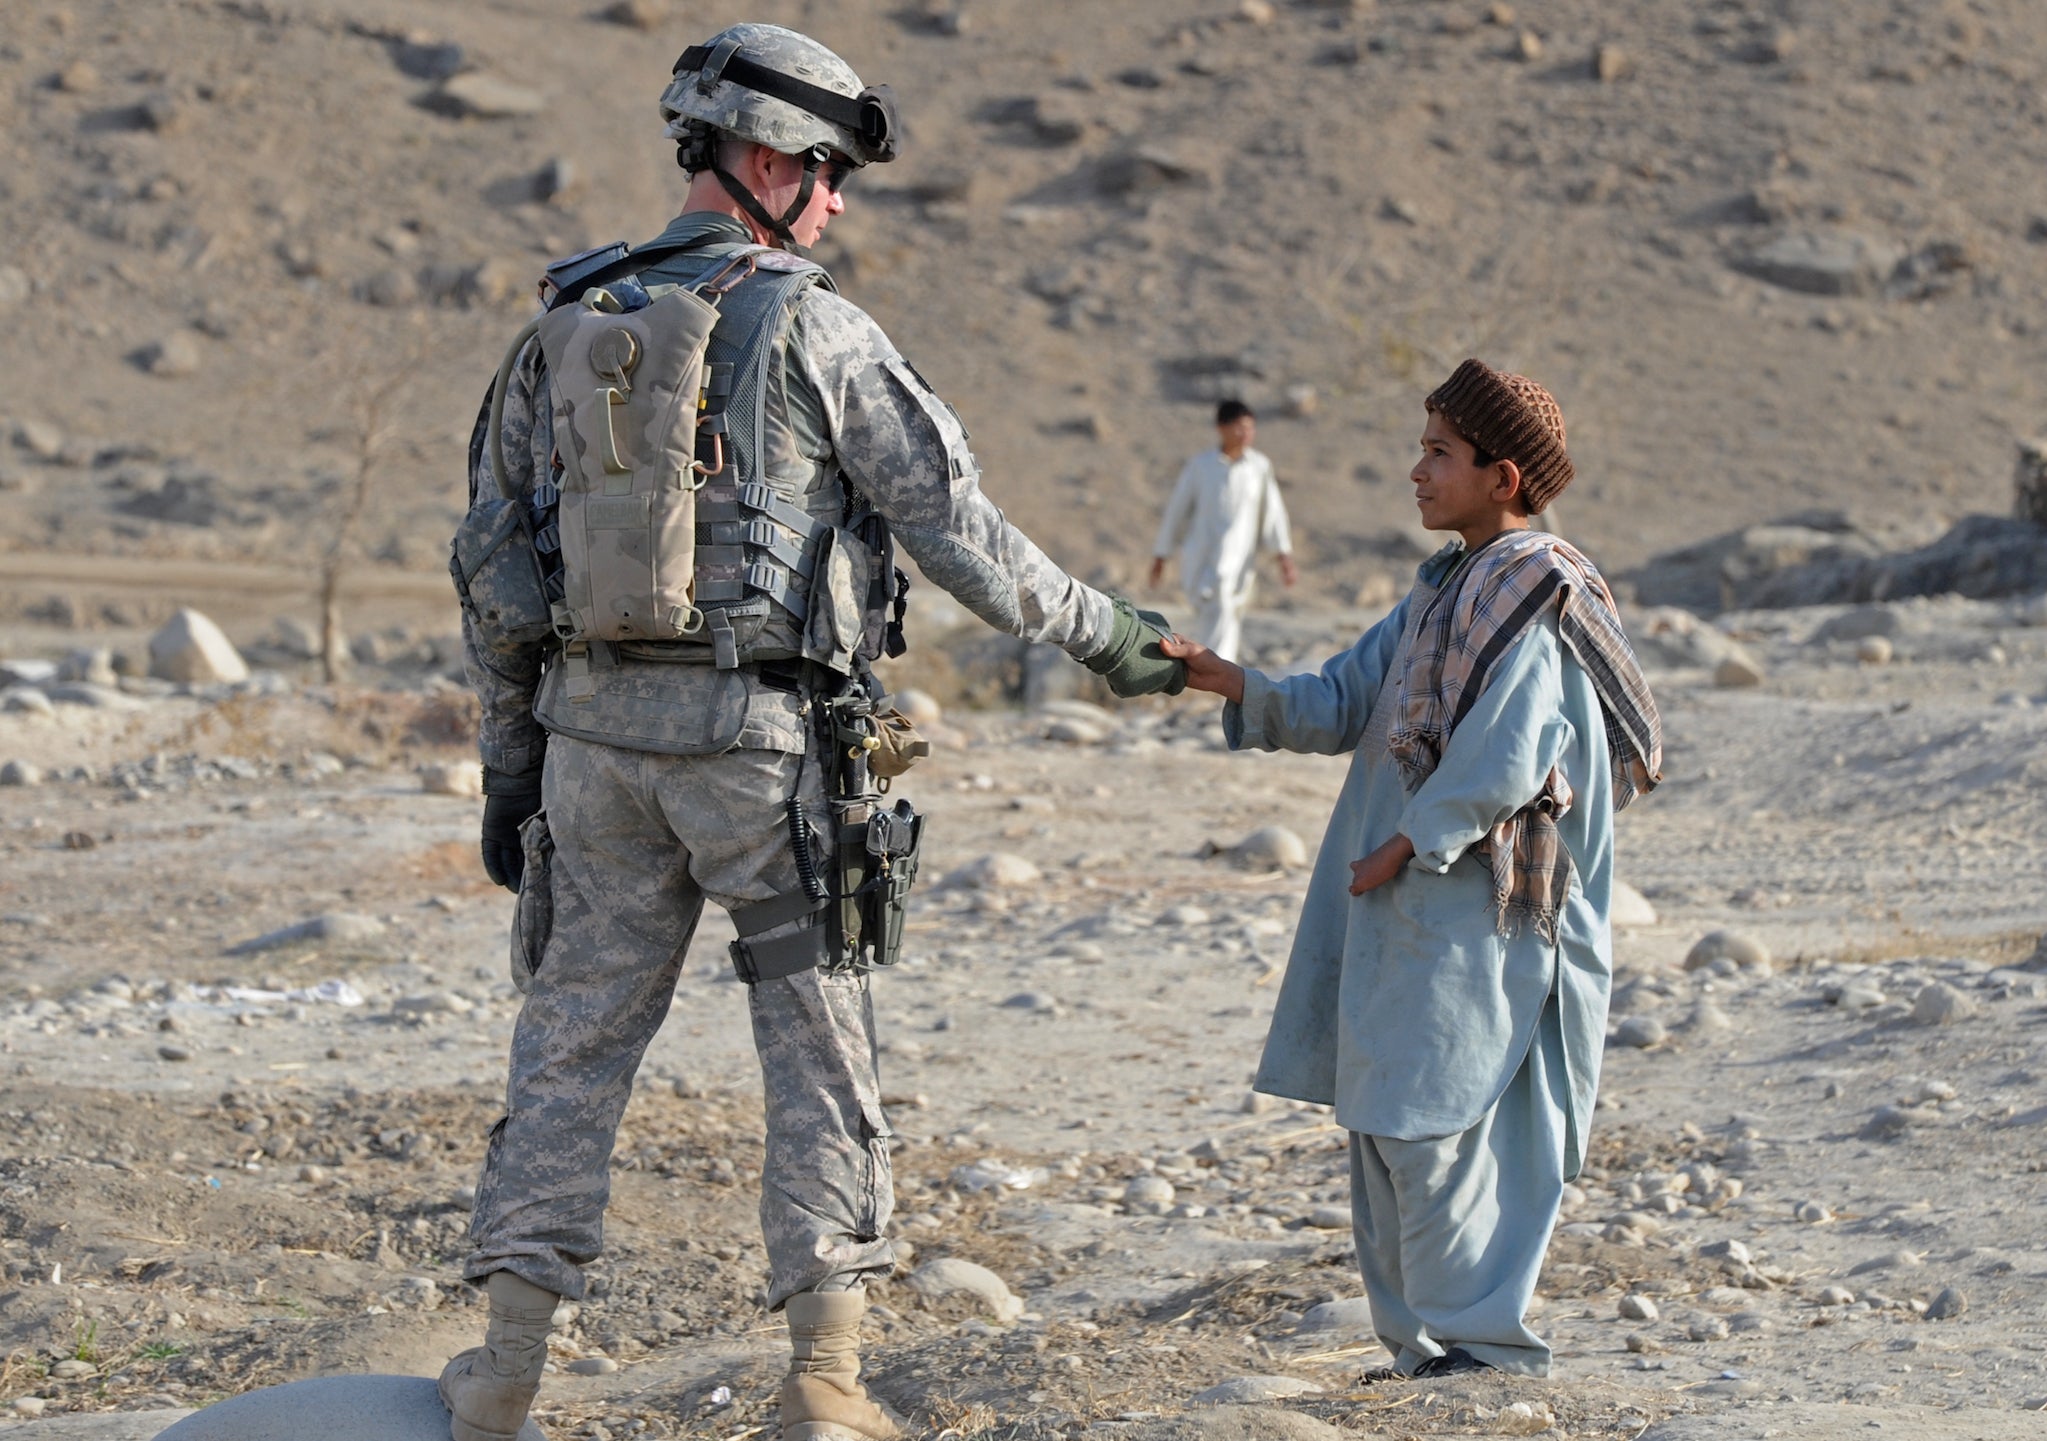 A young child shakes a US soldier's hand in Afghanistan in 2009.